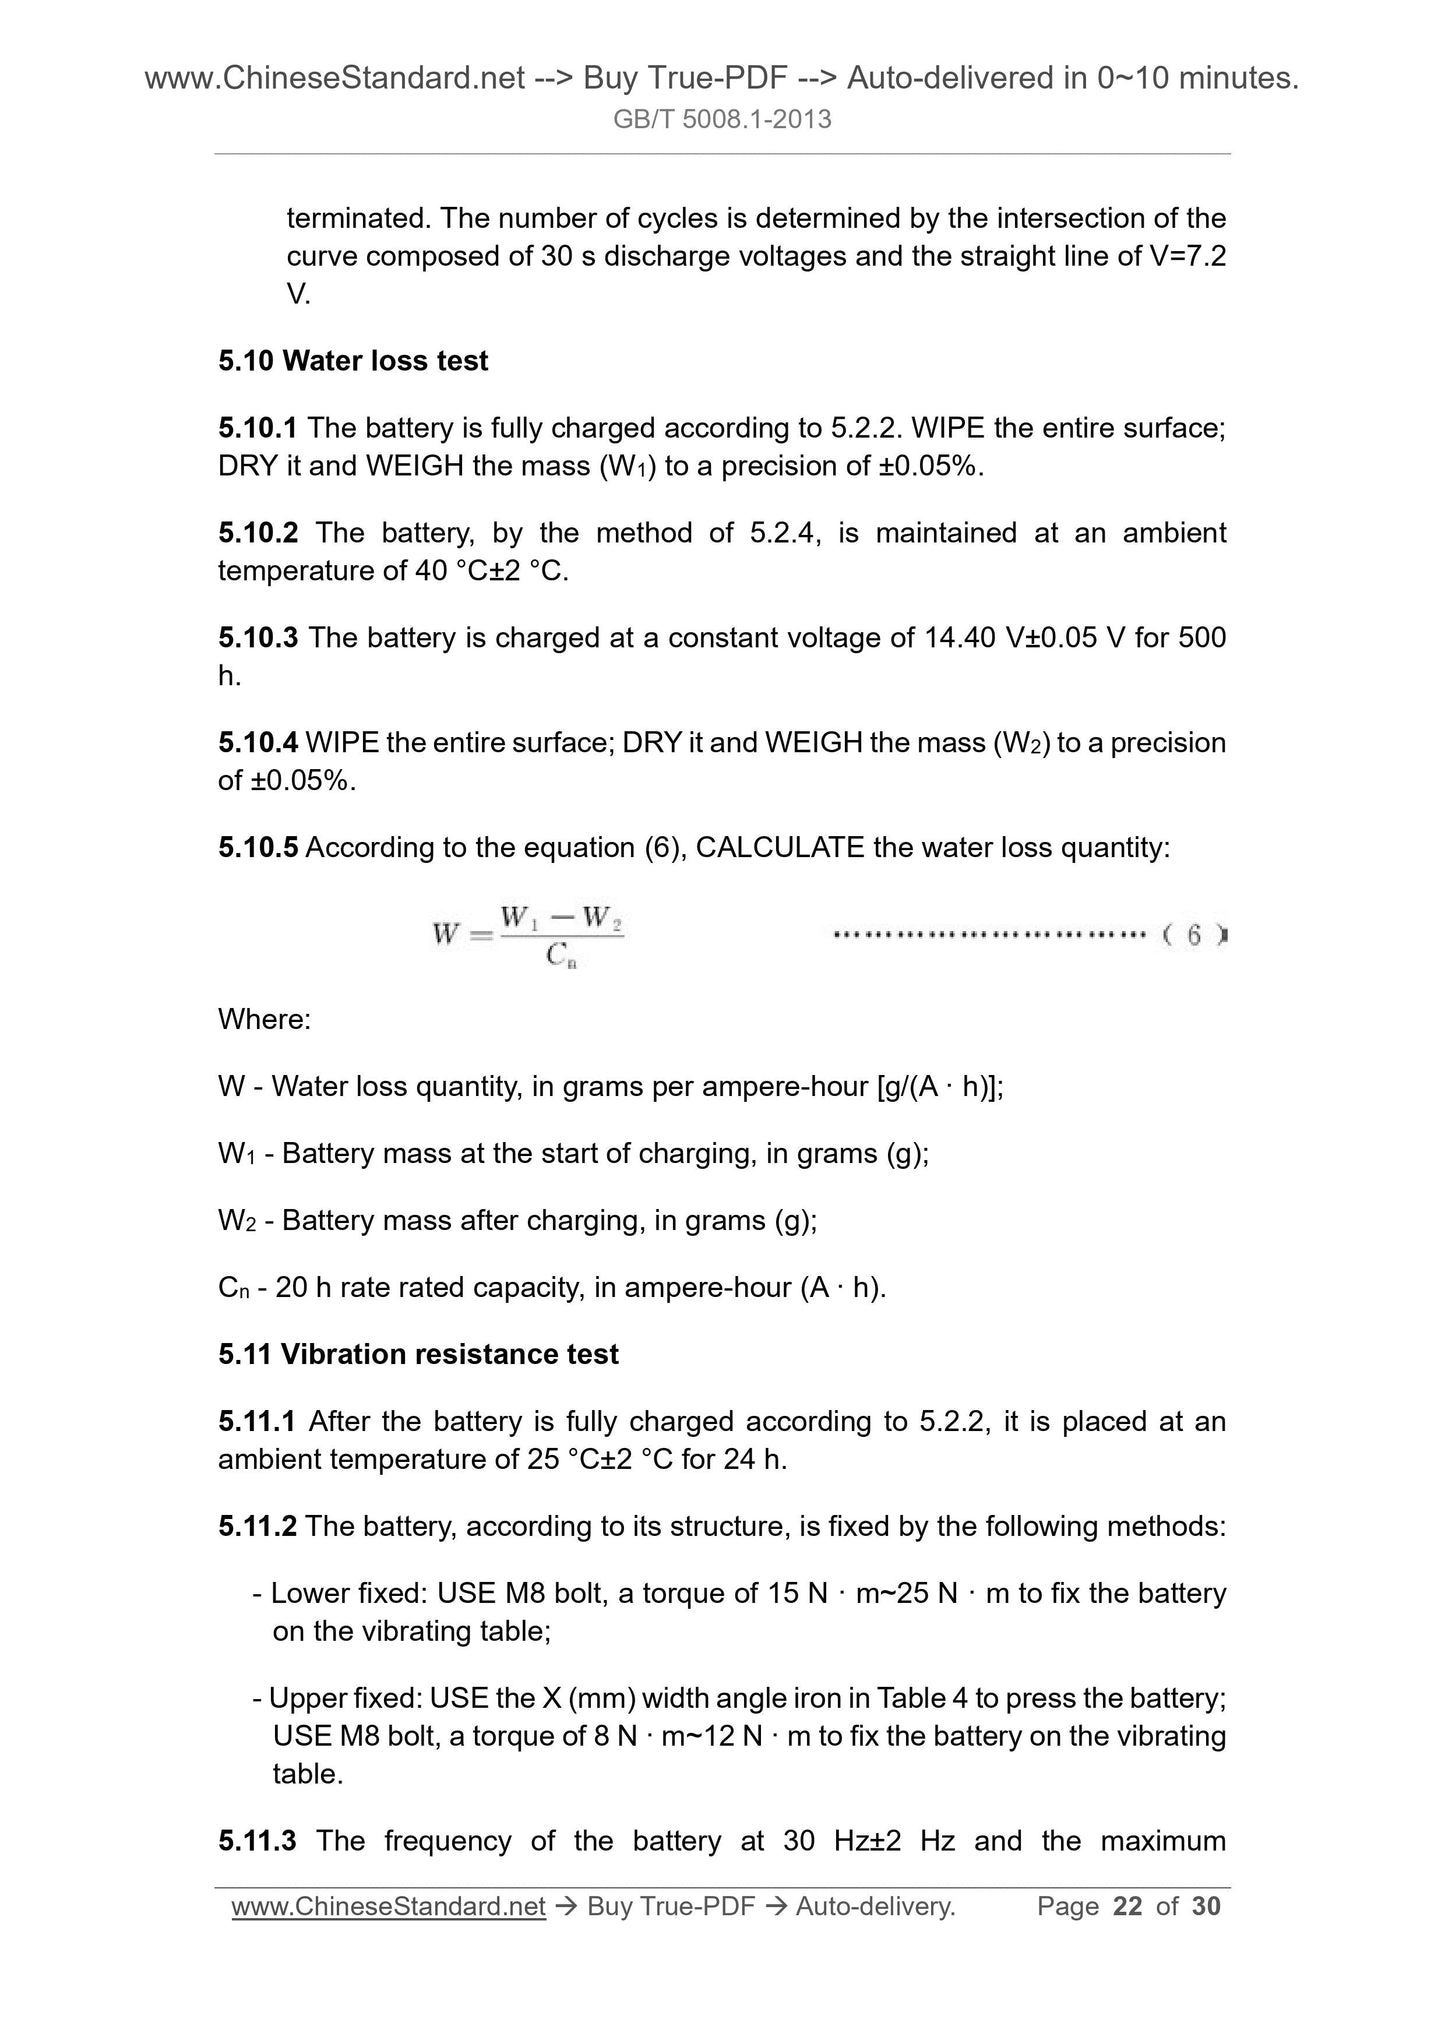 GB/T 5008.1-2013 Page 9